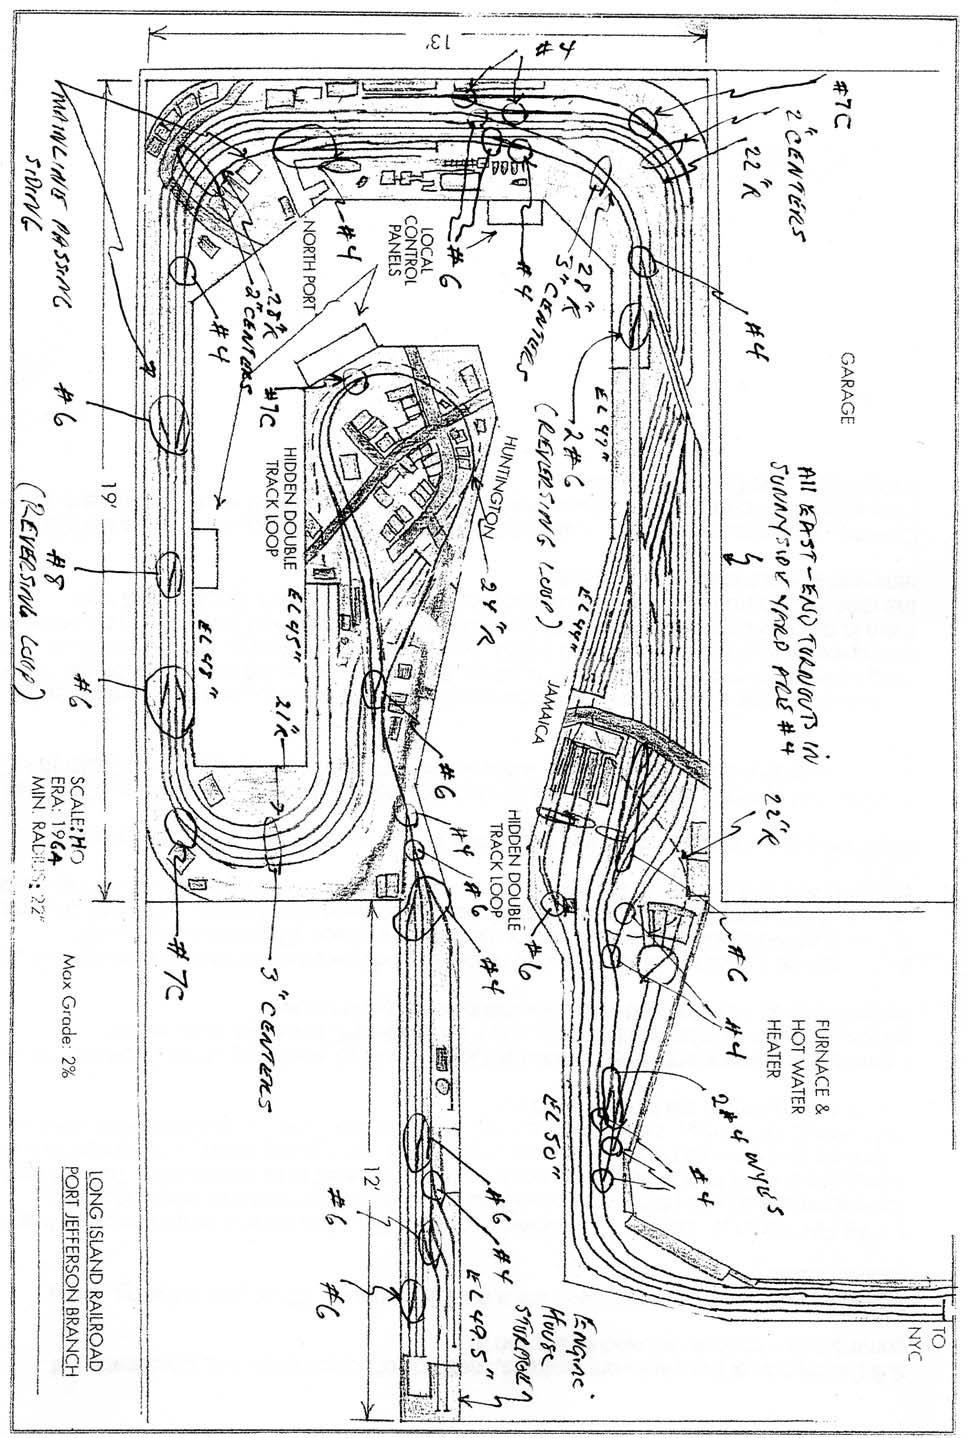 From page 1 Track Plan Scale